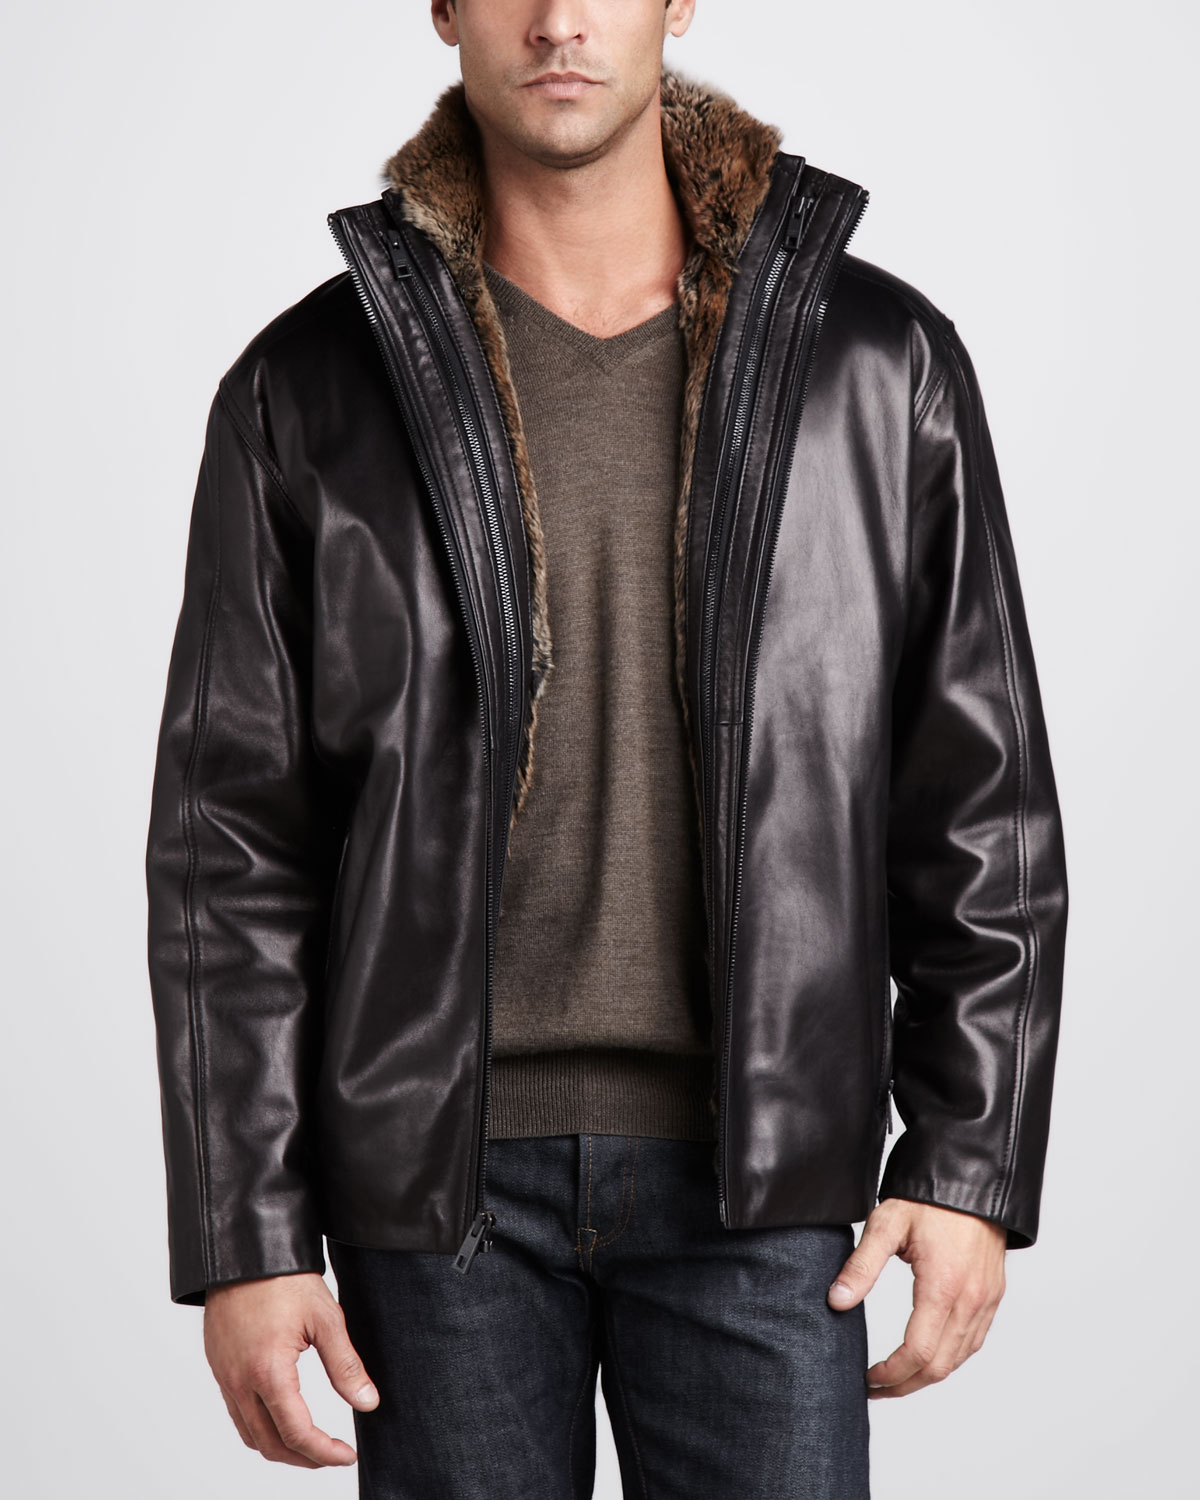 Lyst - Andrew Marc Luster Luxe Leather Jacket in Black for Men